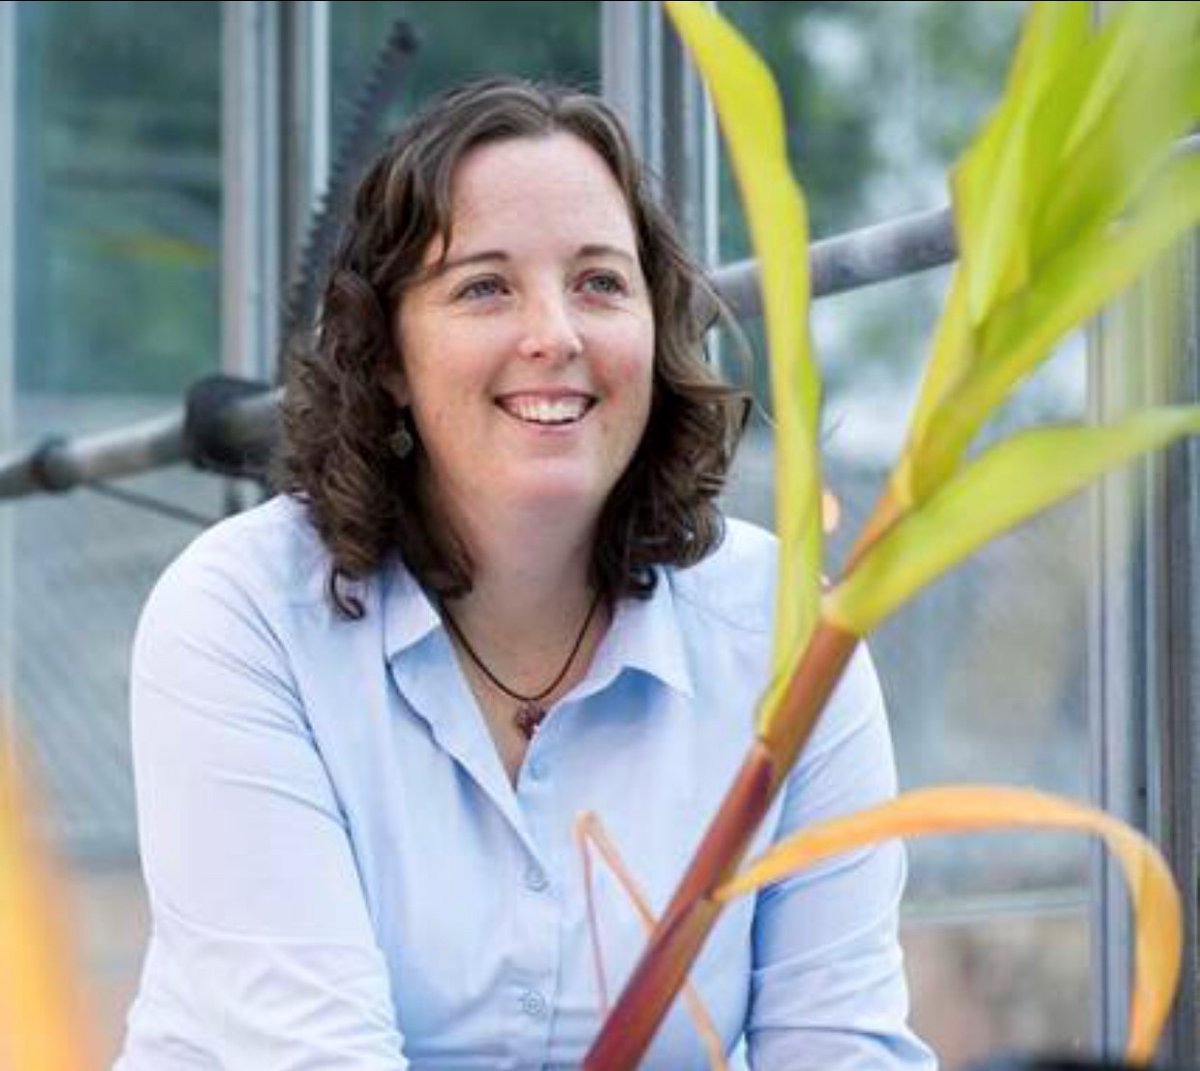 For your lunchtime enjoyment, join us at noon today as we host Dr. Amanda Rasmussen, all the way from the UK: arlab.co.uk She will unlock the mysteries of 'Adventitious root physiology in horticultural crops' Email ddtreadw@ufl.edu for Zoom info.